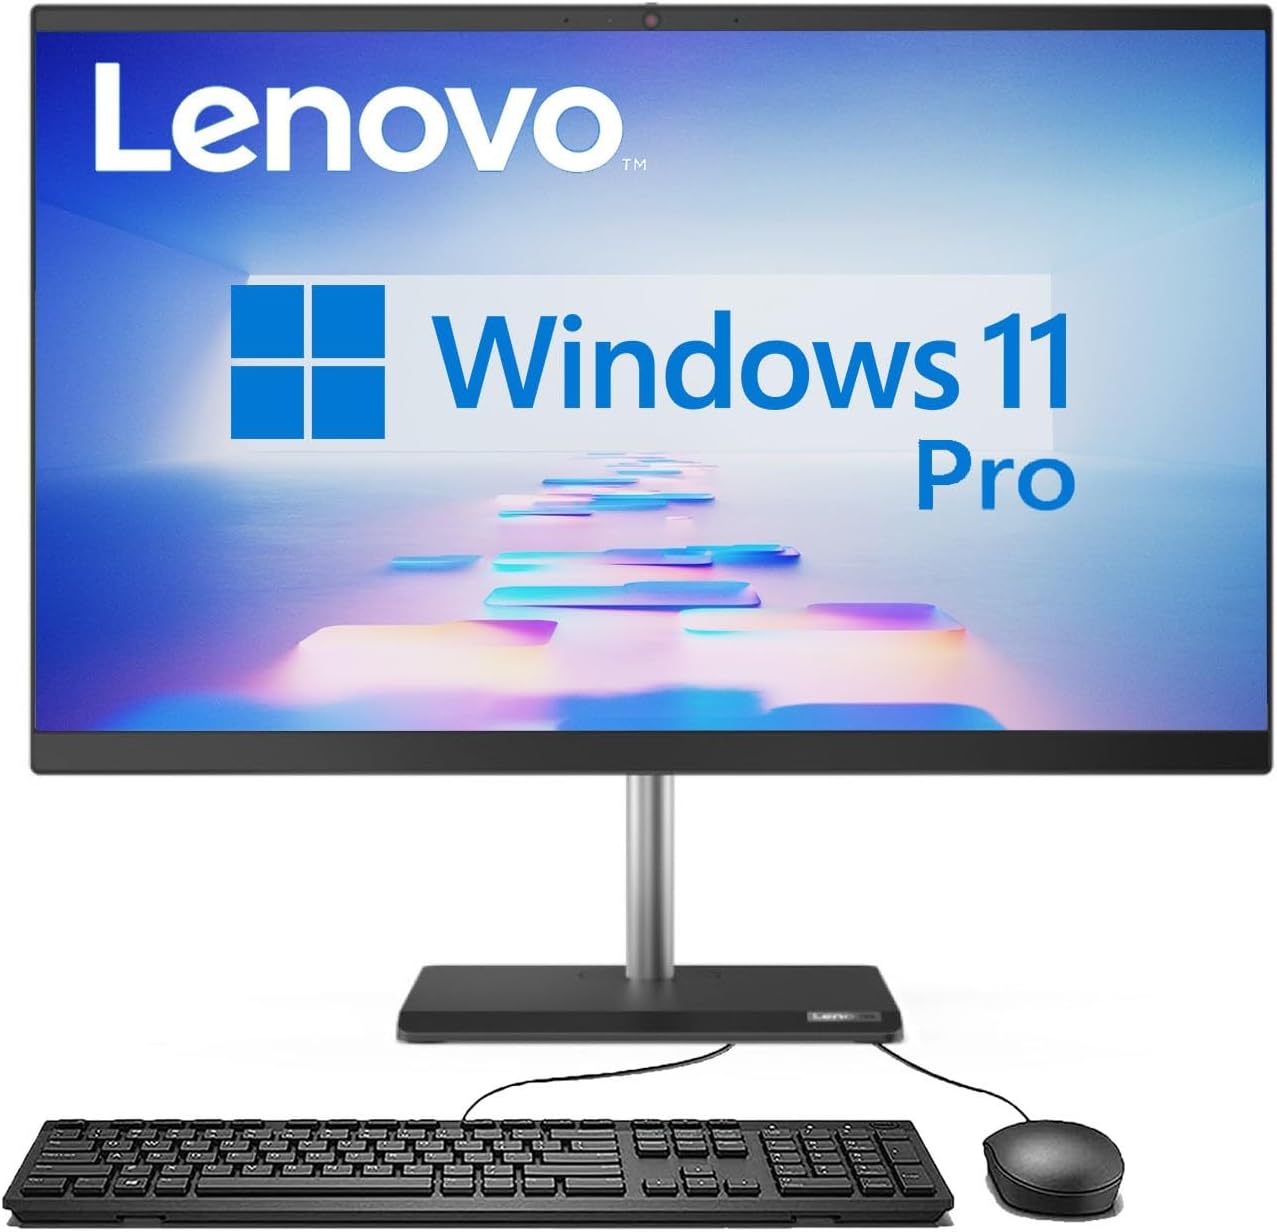 Lenovo V50a Business All-in-one Computer, 23.8″ FHD IPS Display, Intel 4-Core Processor, 16GB RAM, 1TB PCIe SSD, Wi-Fi, Webcam, DVD-RW, HDMI, Extra Monitor Support, 2X USB-C, Windows 11 Pro